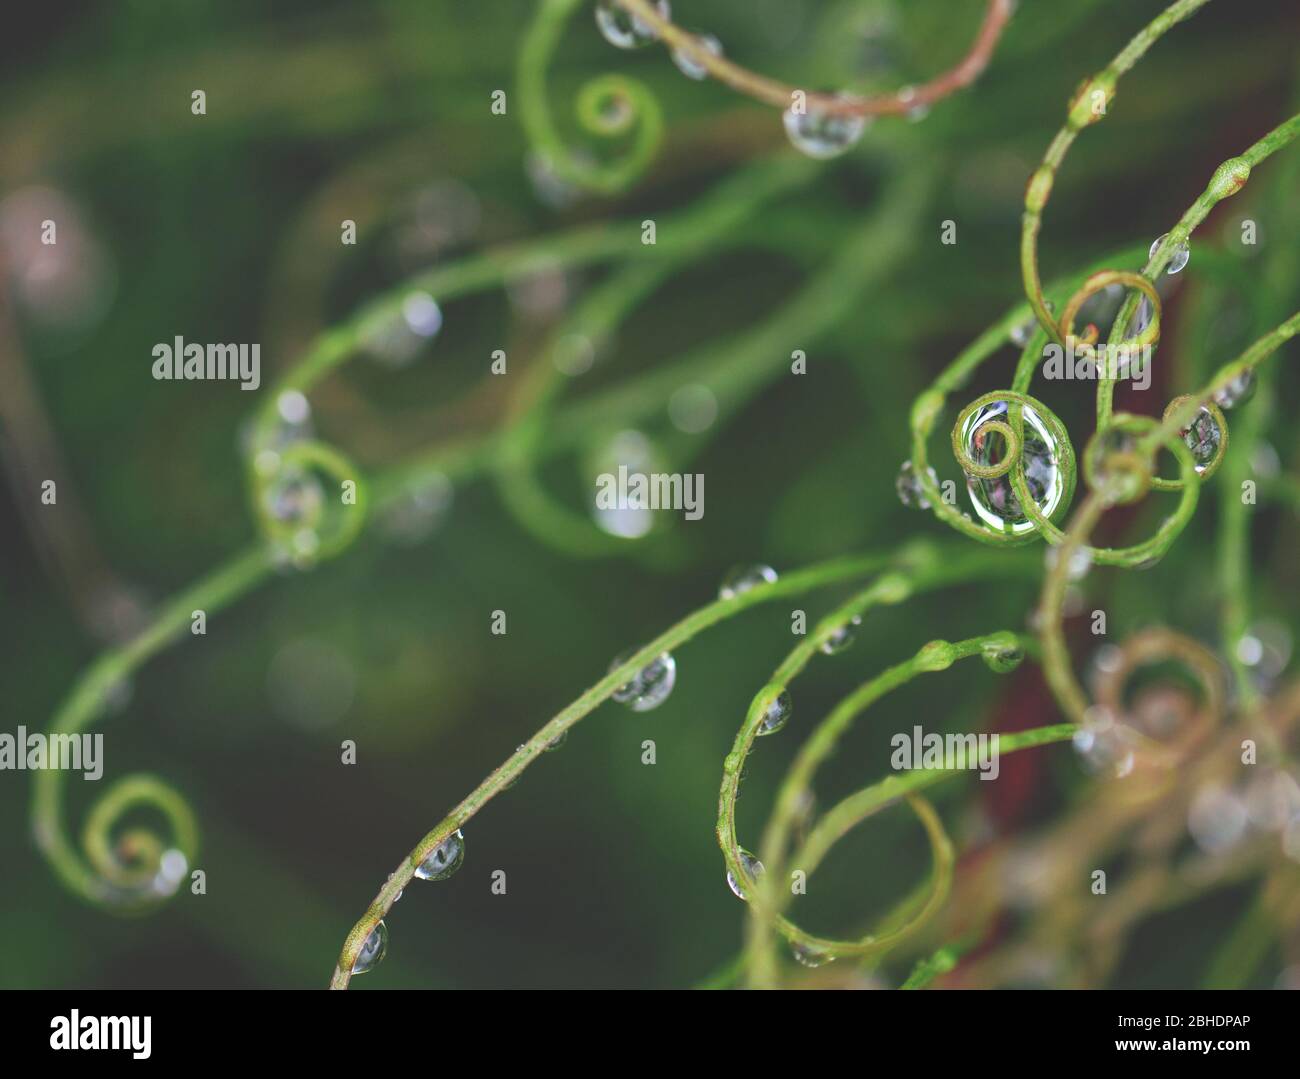 Abstract nature background of raindrops on curled foliage of the Australian native Curly Wig sedge, Caustis flexuosa, family Cyperaceae, Stock Photo